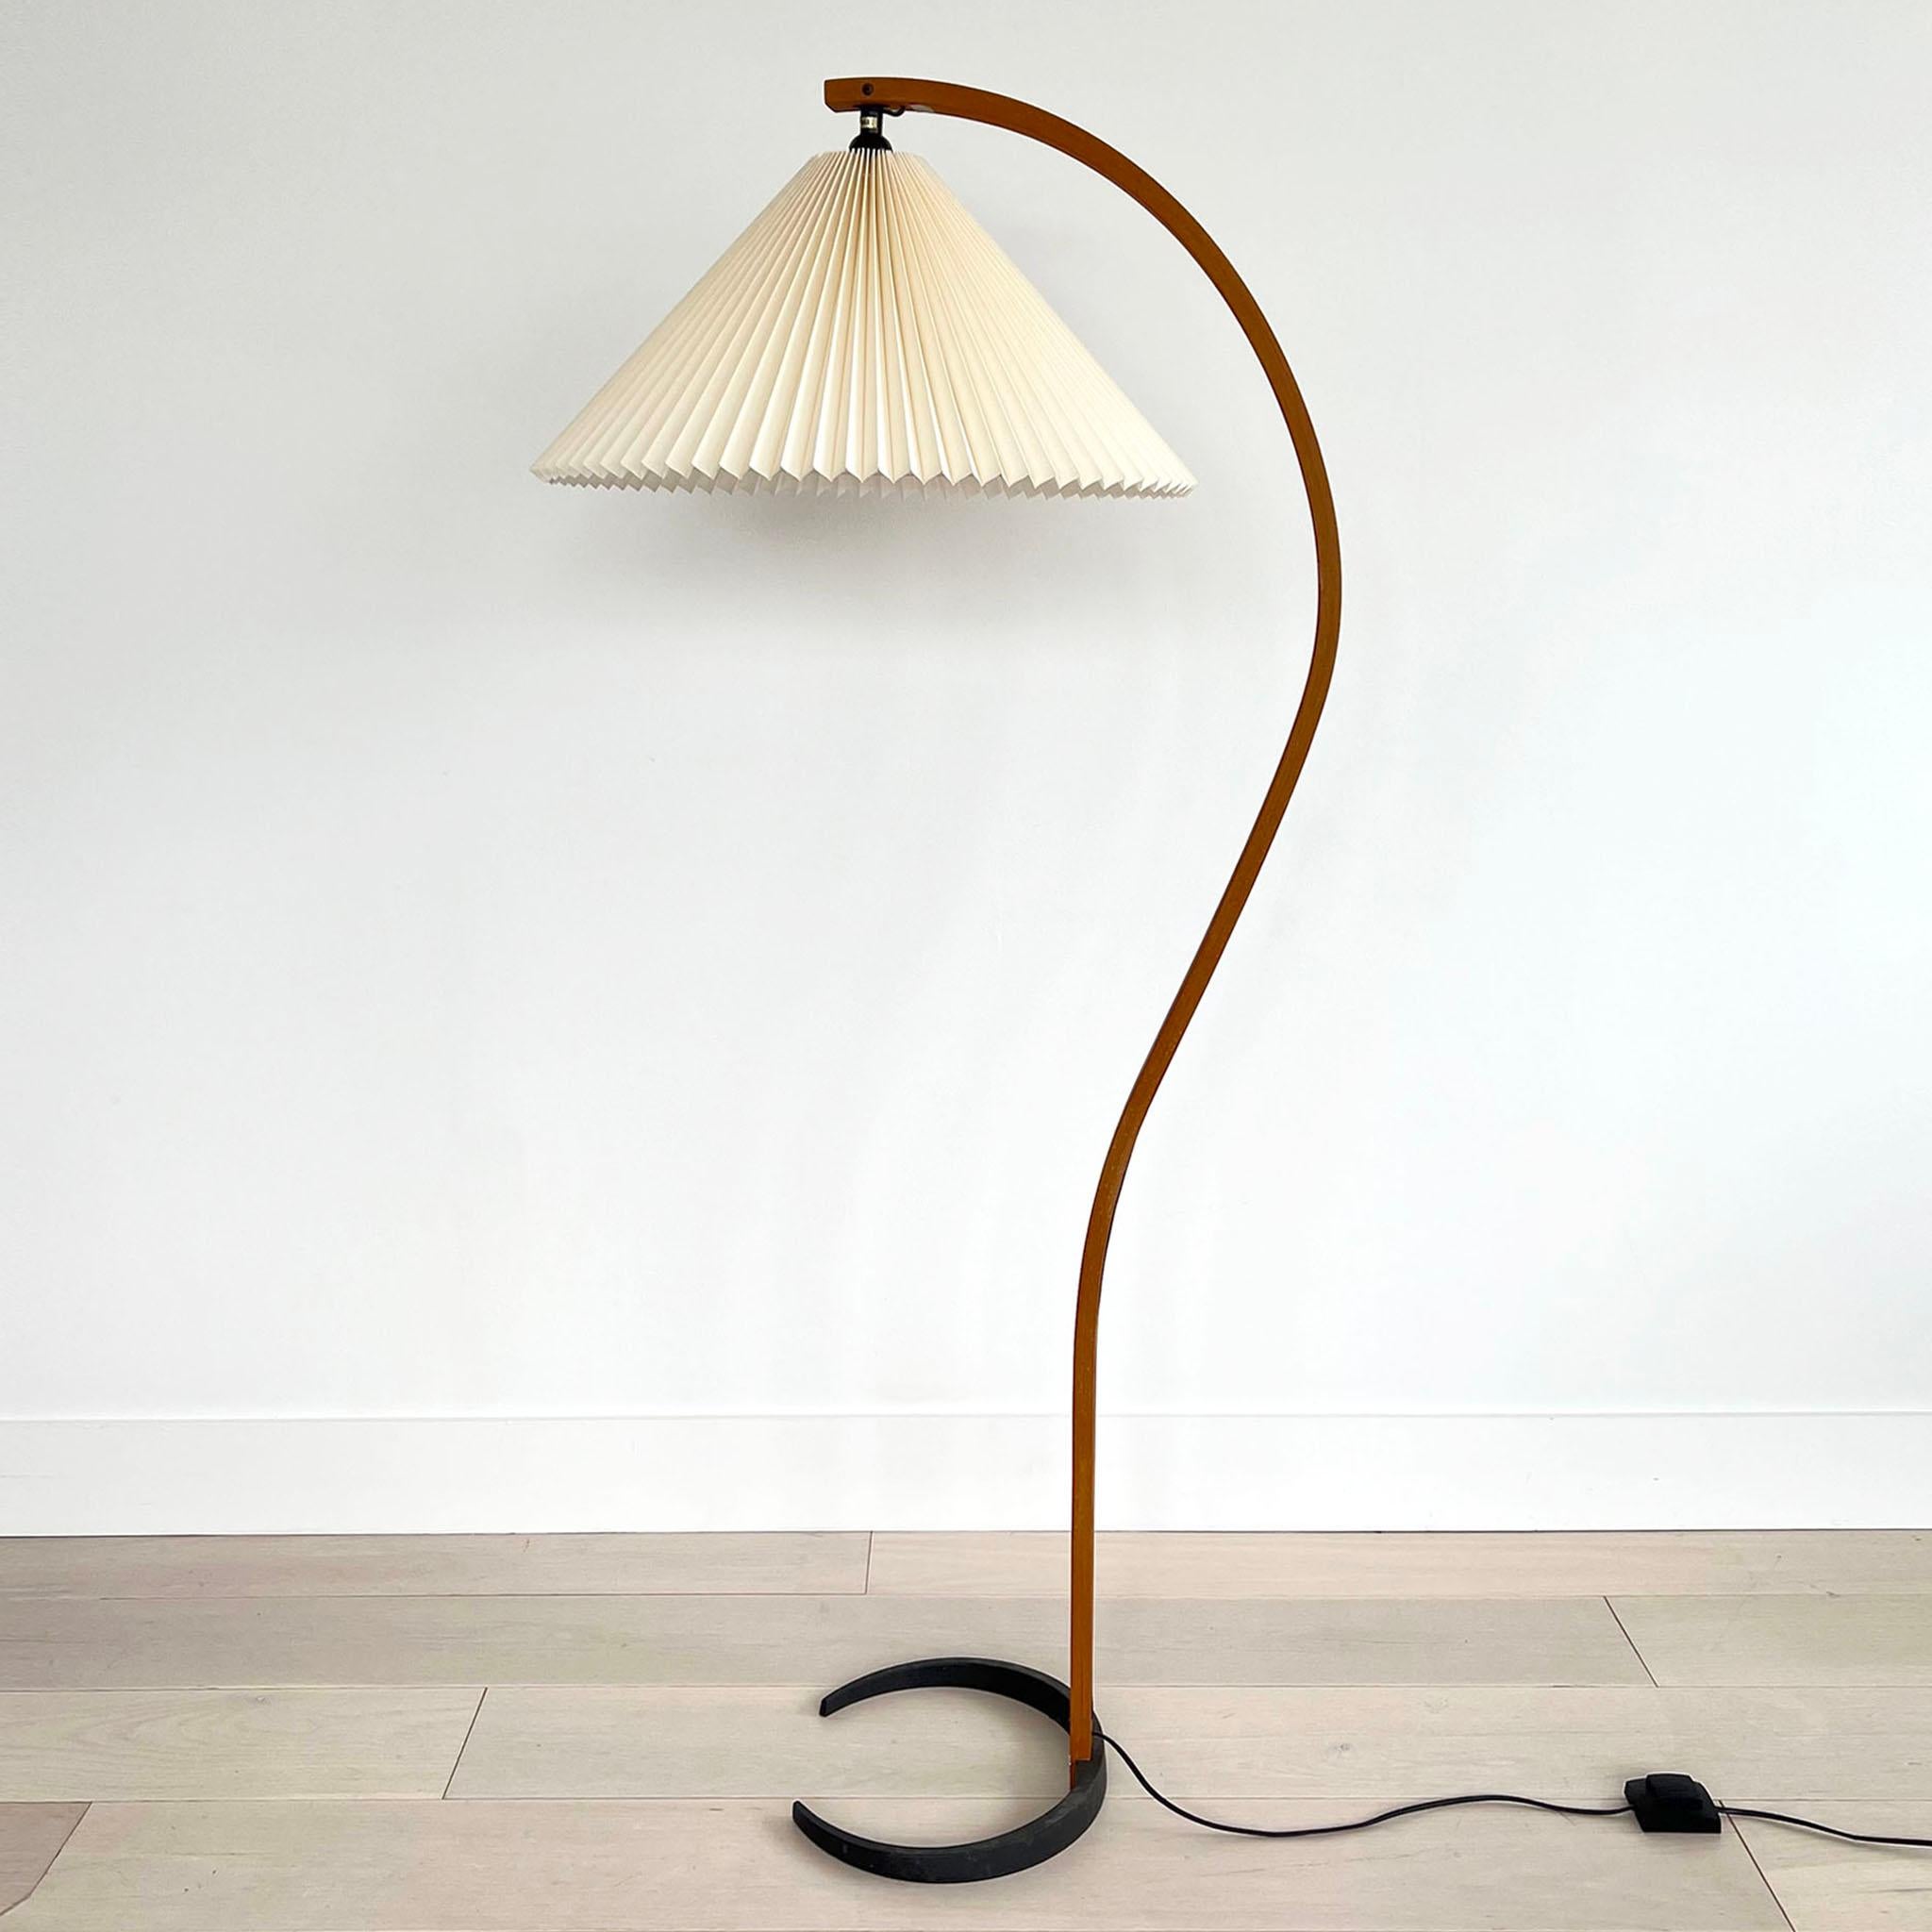 Mads Caprani Danish floor lamp, circa 1970's. This iconic lamp has a sculpted teak base with a steal base. The lampshade is brand new and produced in the original process and style.  The teak frame has some light scuffing/scratching. Stamped Caprani